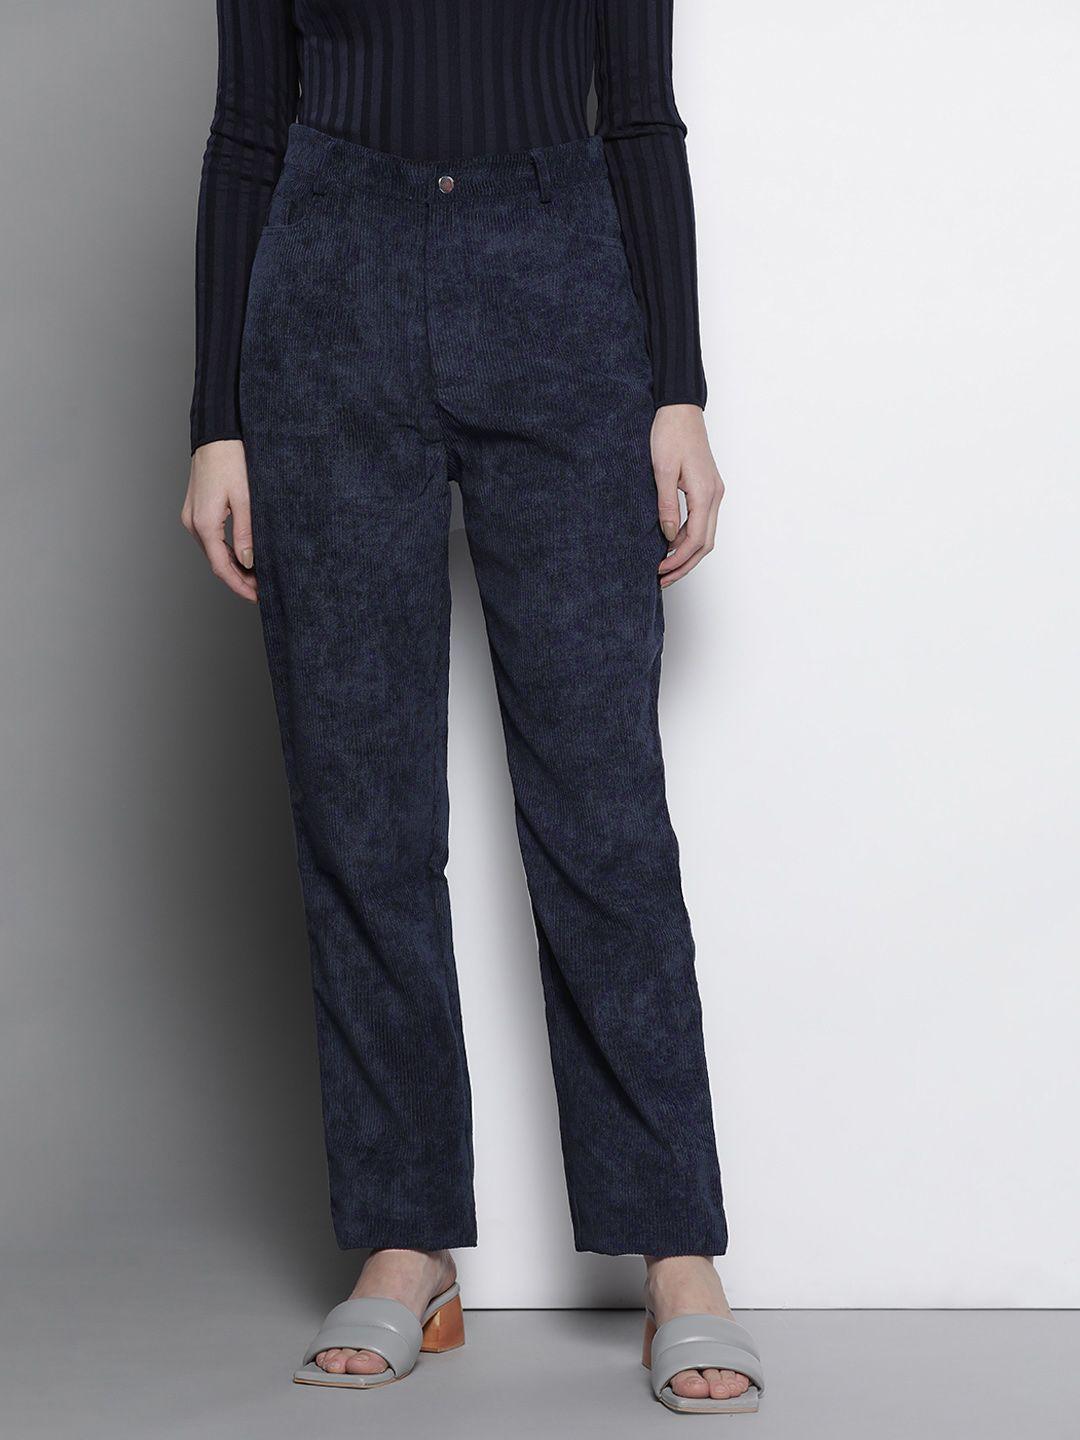 missguided women navy blue solid corduroy mid-rise trousers